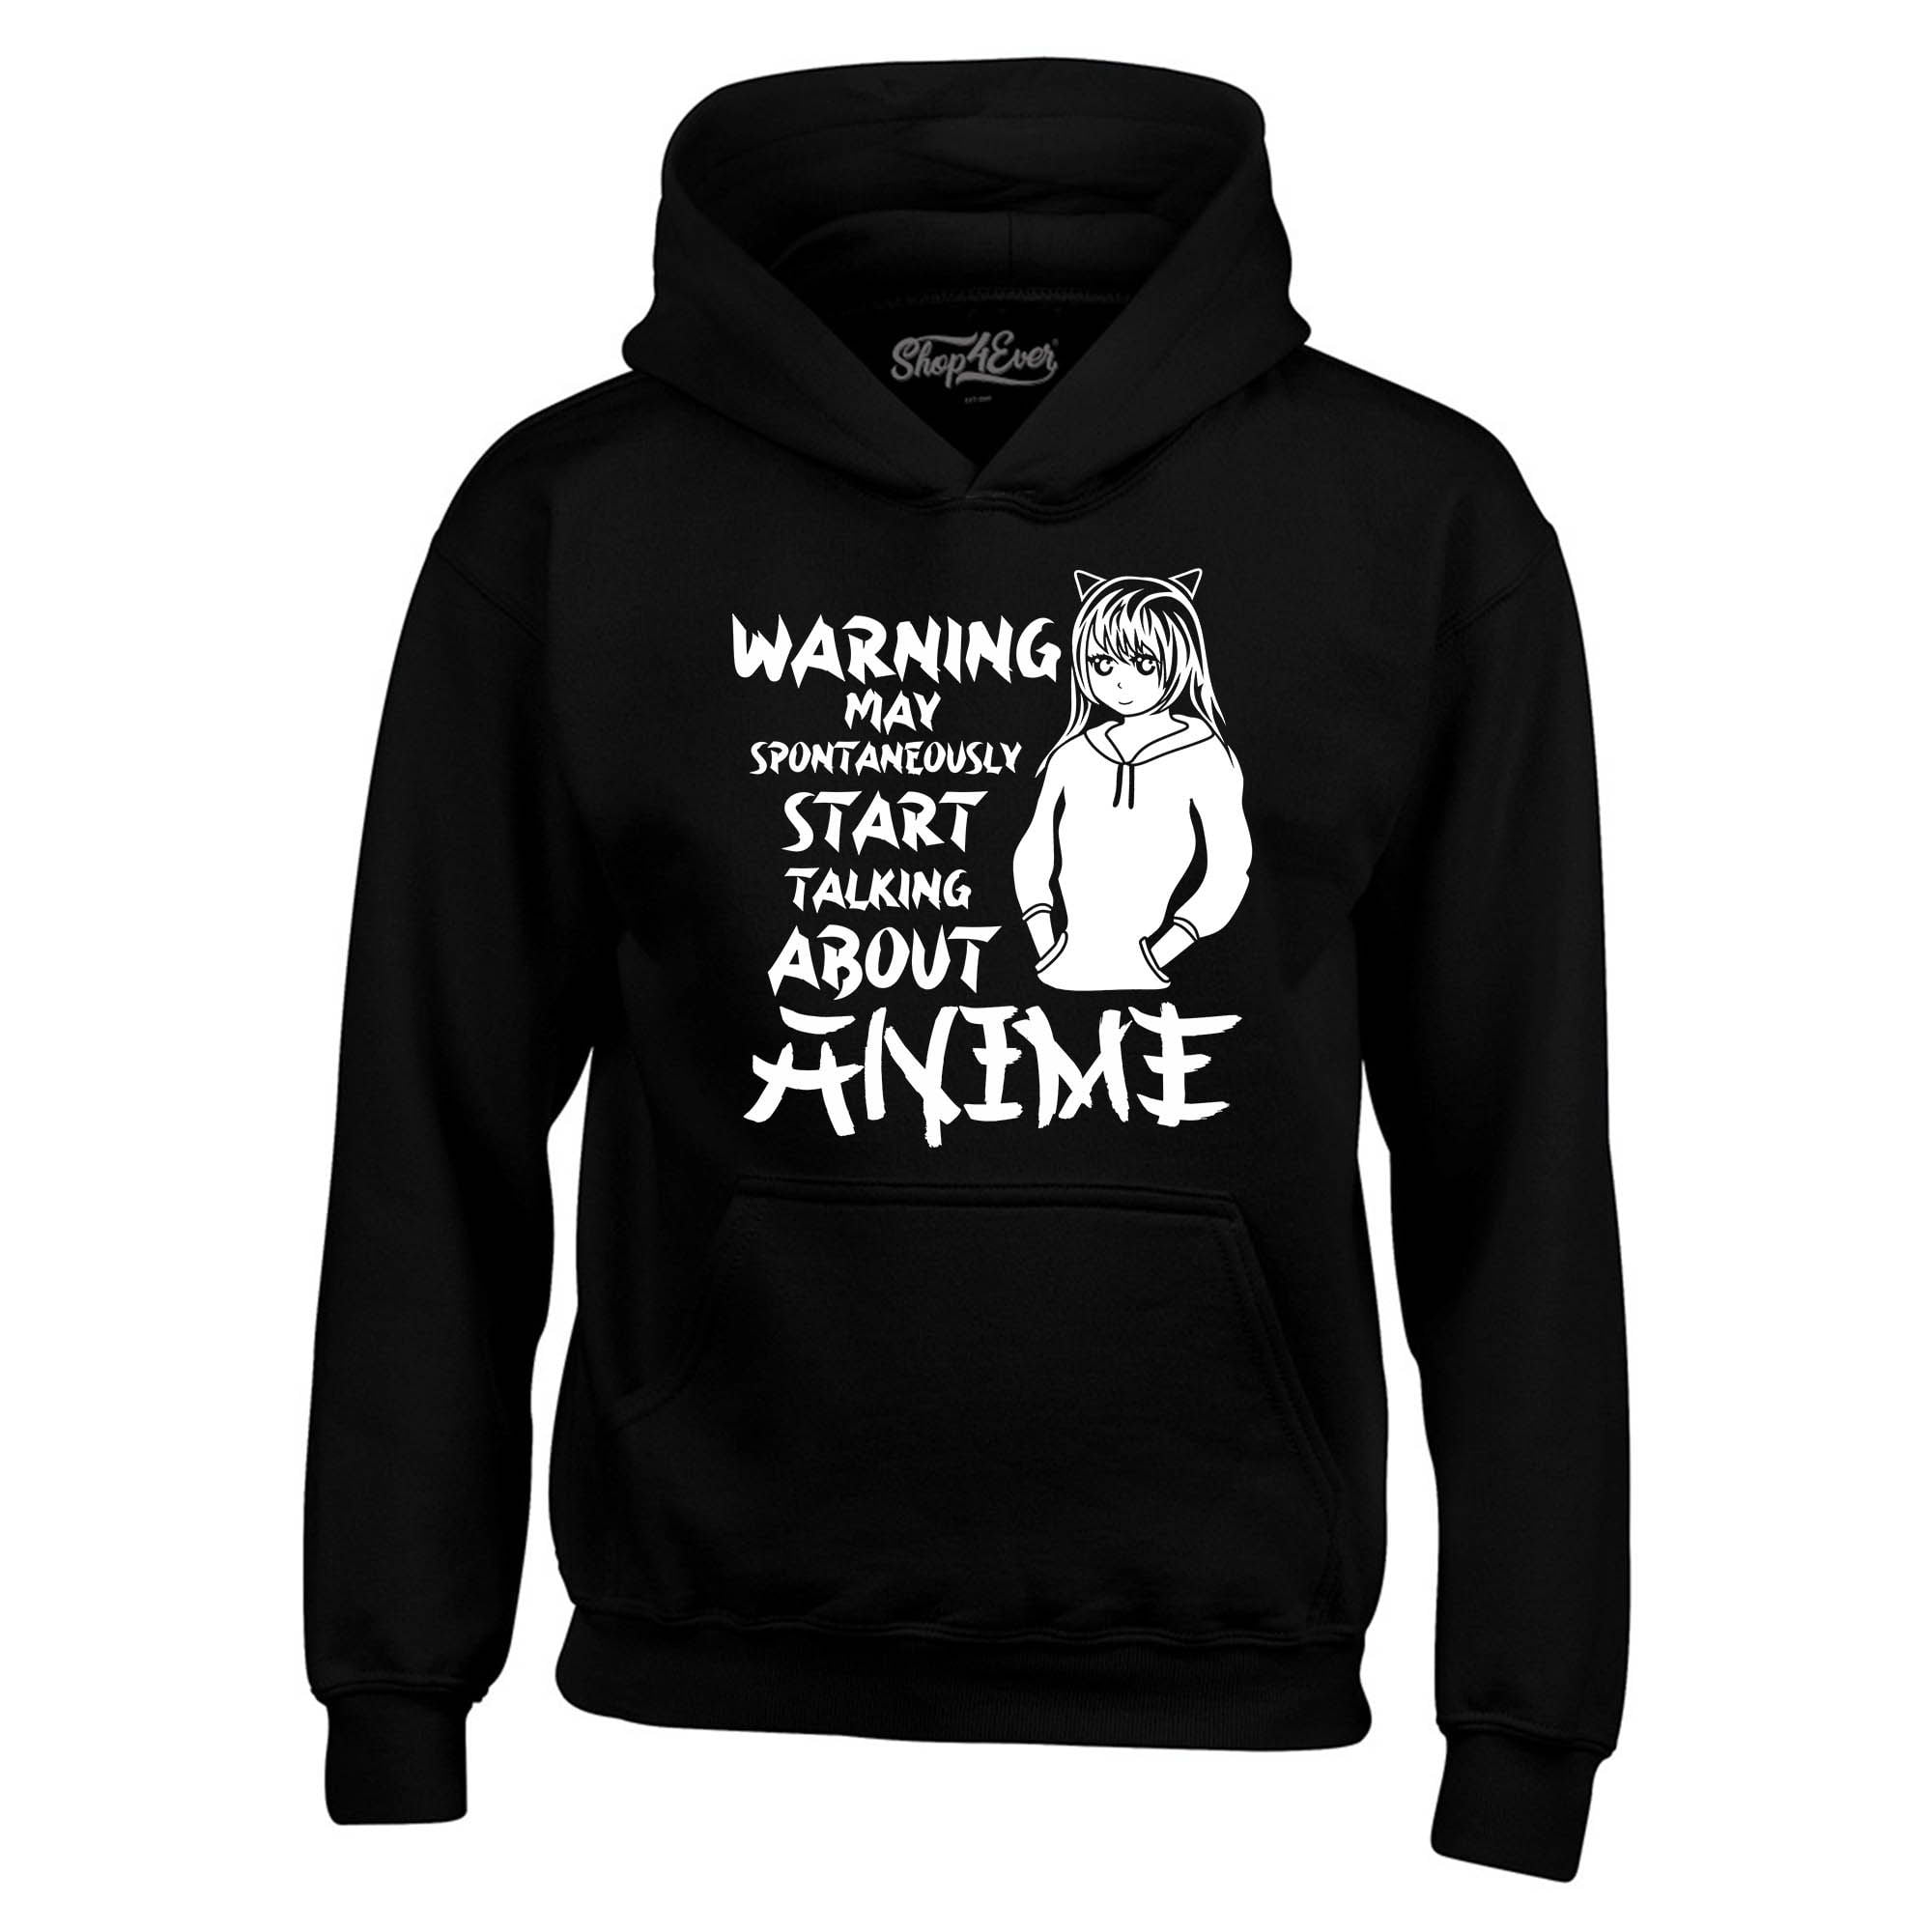 Shop4ever Mens Warning May Start Spontaneously Talking About Anime